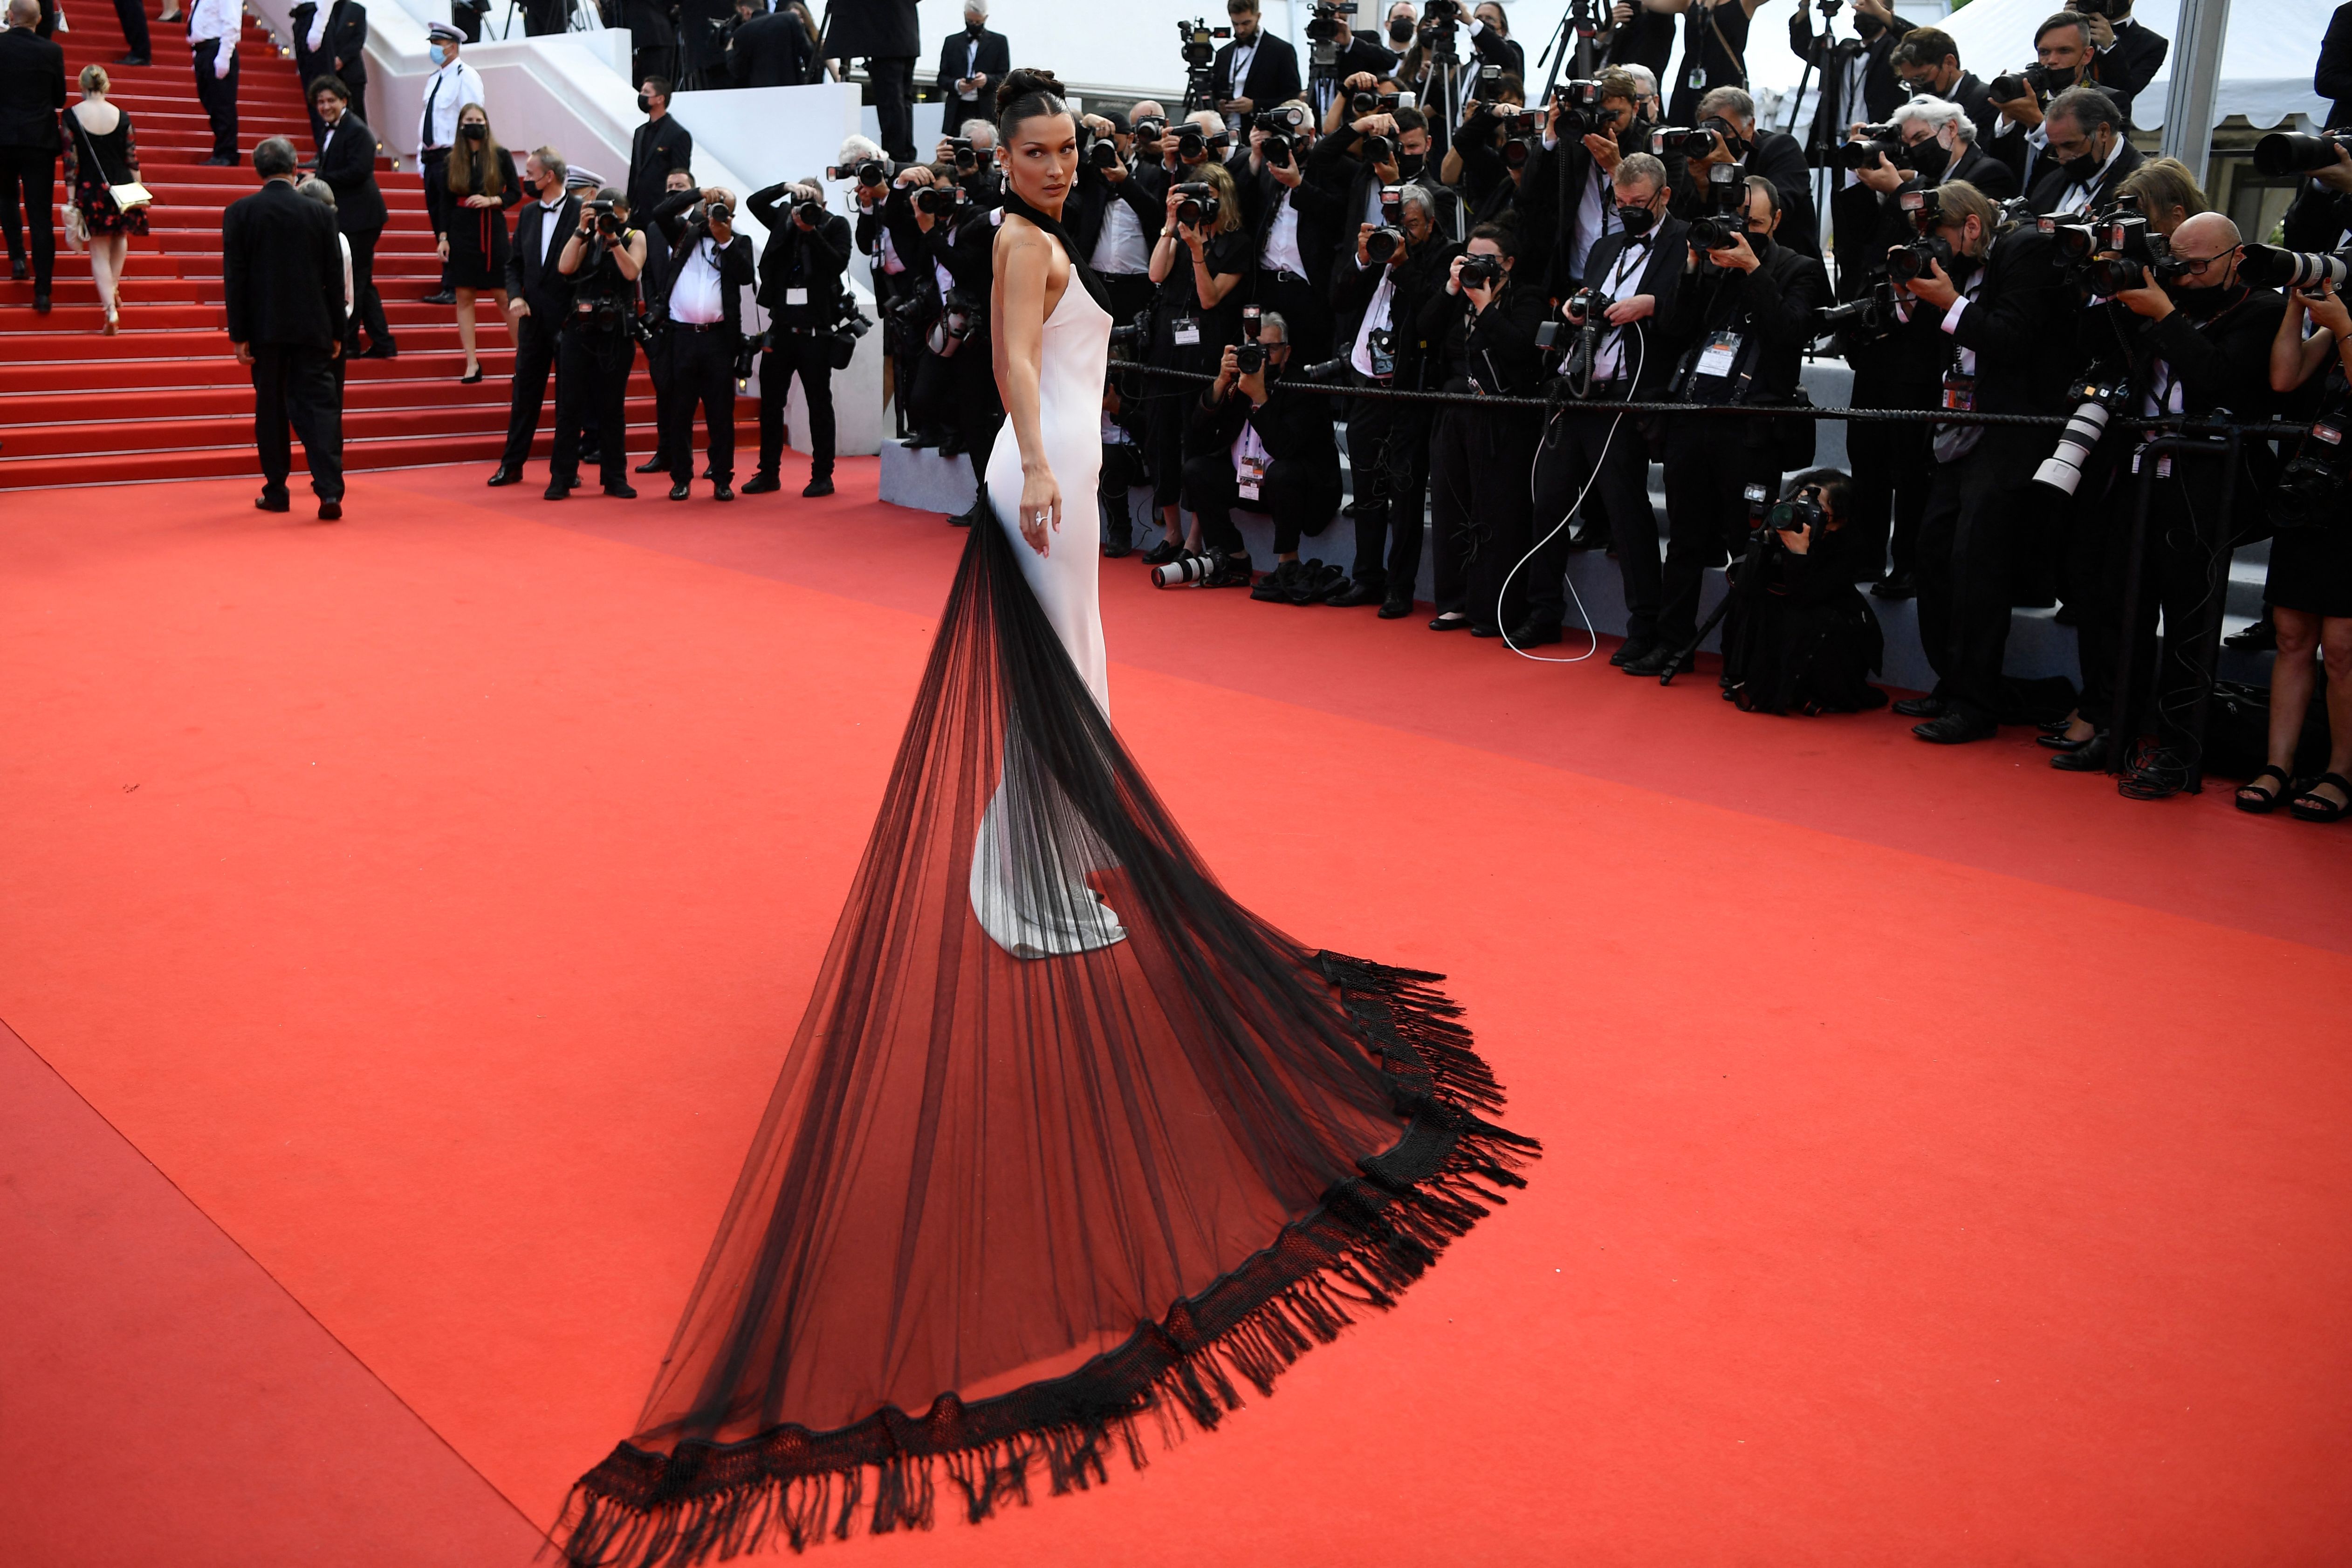 Bella Hadid Wears a Black and White Column Gown at Cannes Film Festival in  2021